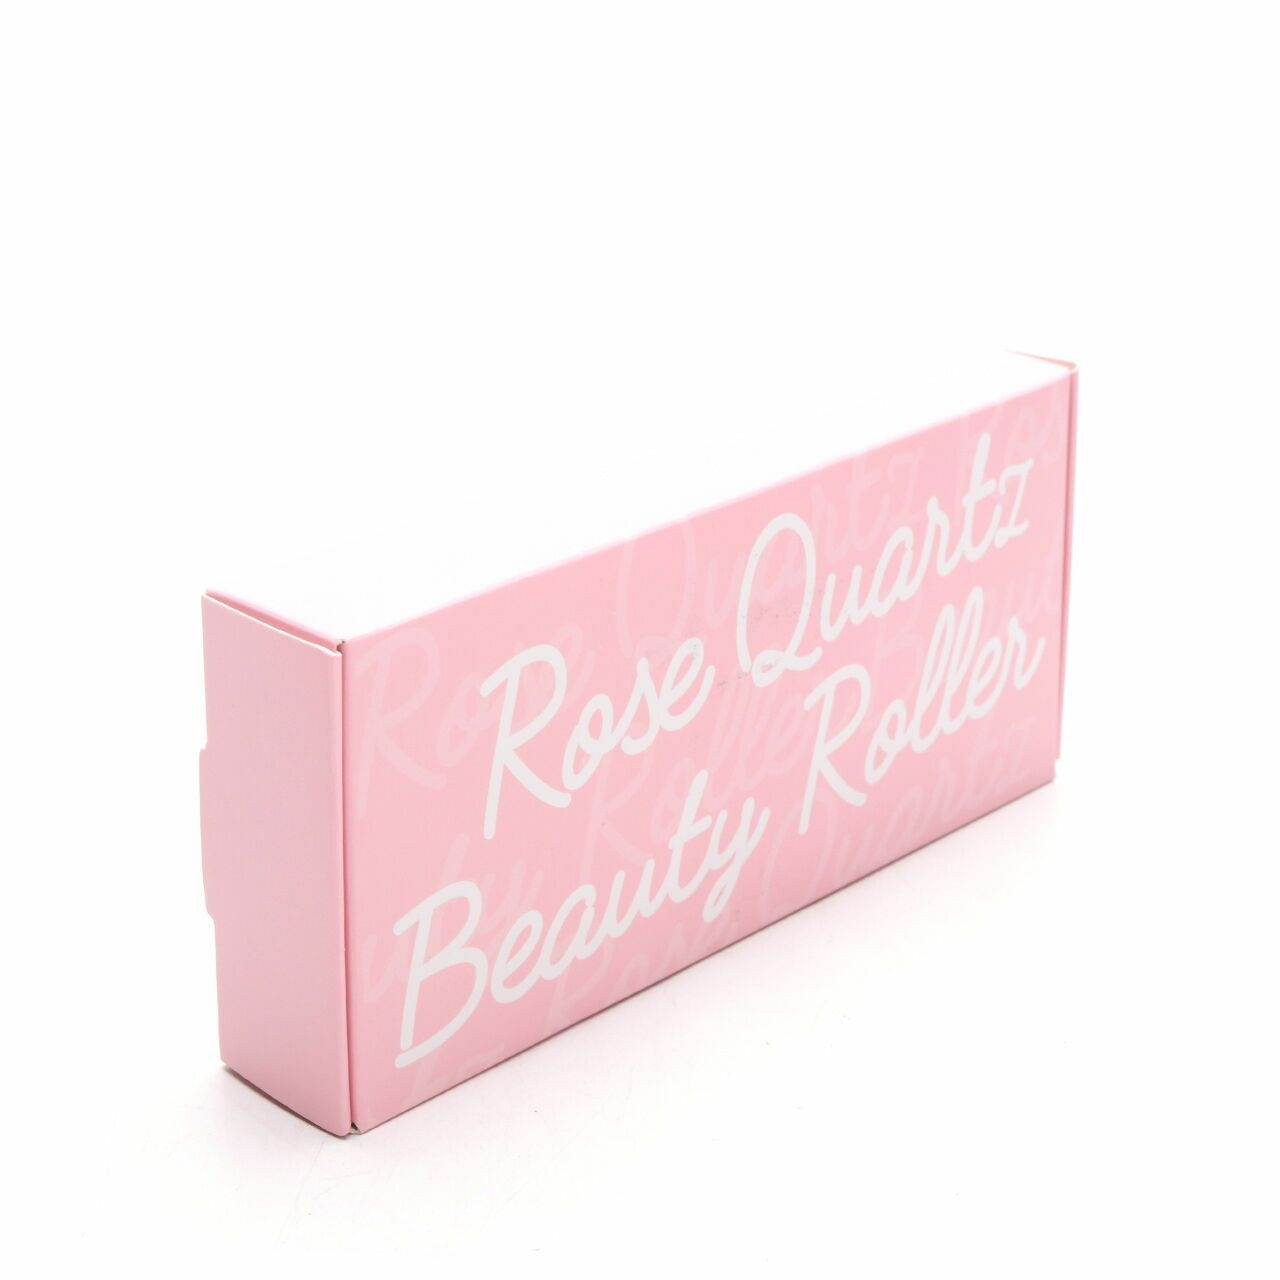 Kay Collection Pink Rose Quartz Beauty Roller Tools